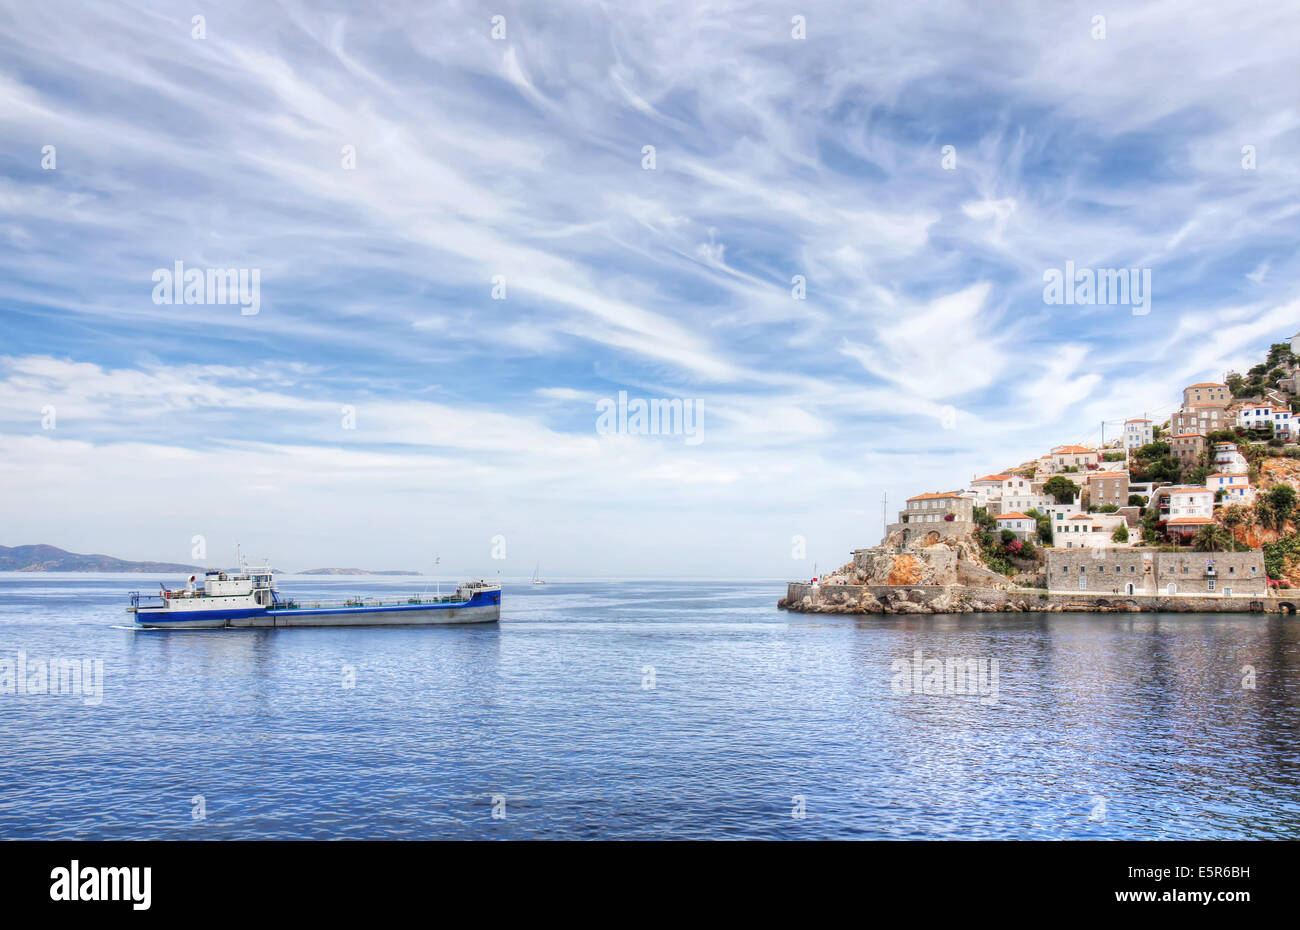 Hydra island and ship, with dramatic cloudy sky, in Greece. Stock Photo